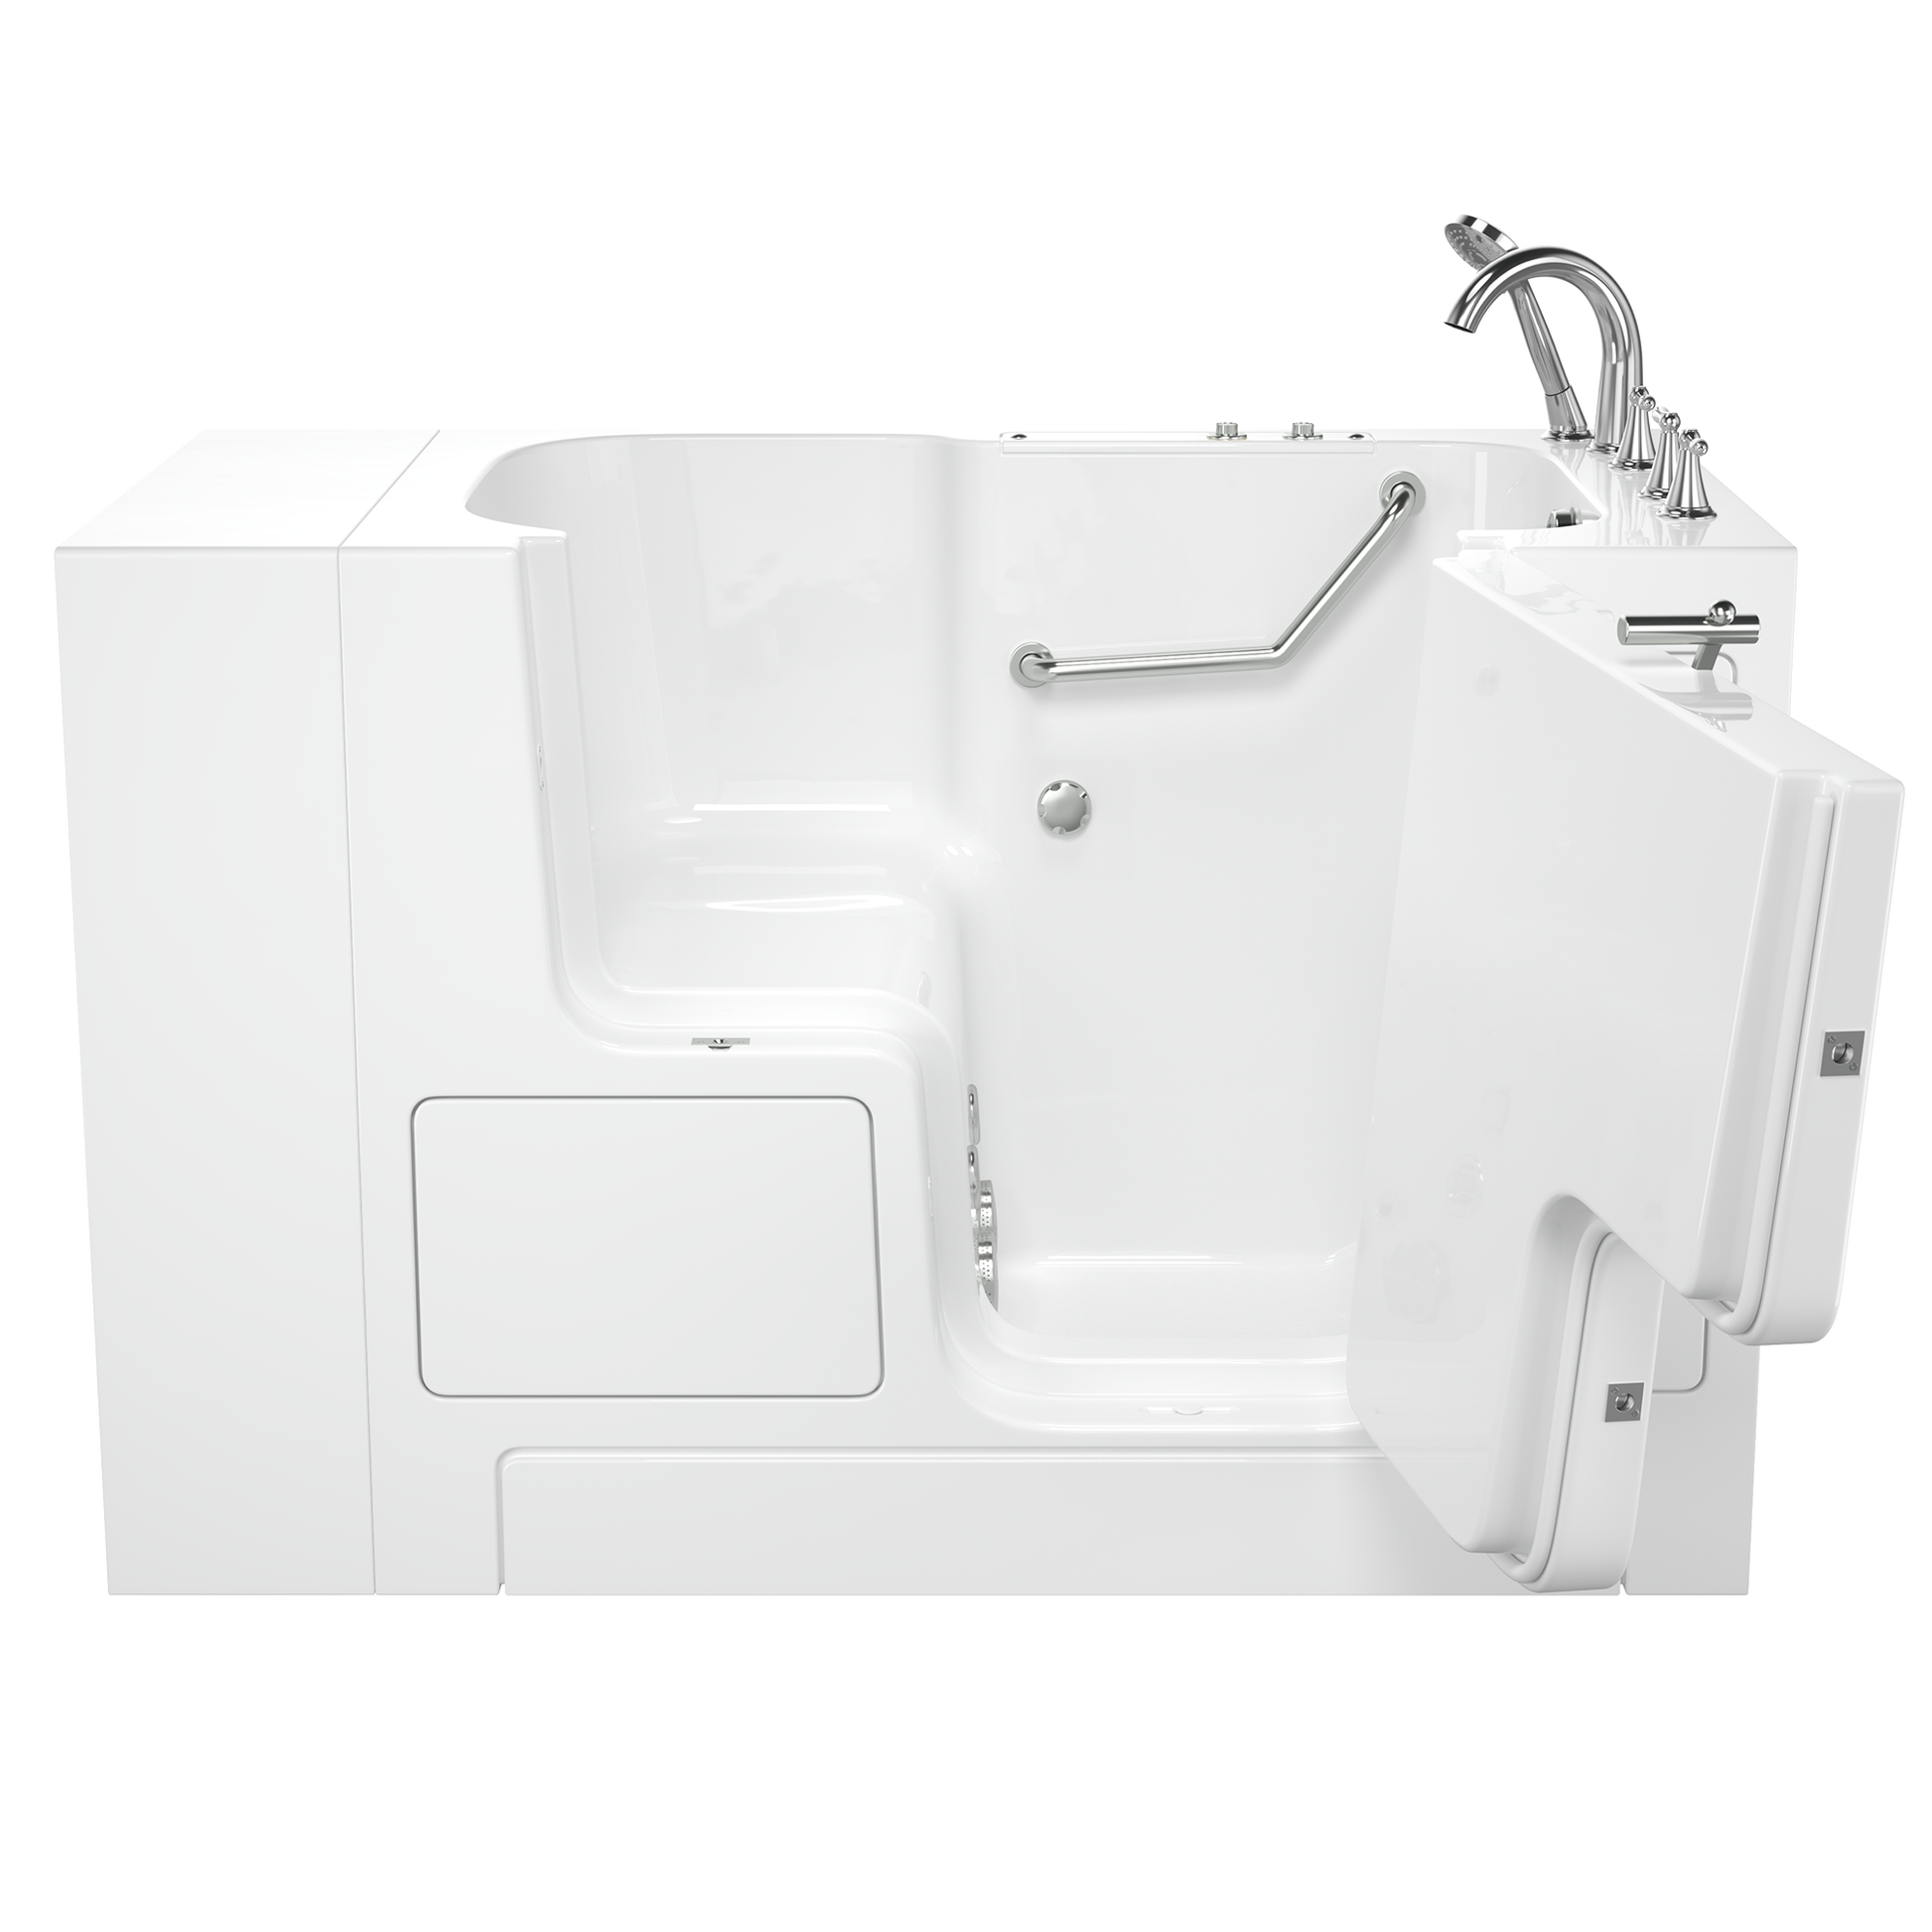 AMERICAN-STANDARD SS9OD5232RJ-WH-PC, Gelcoat Premium Series 32 in. x 52 in. Outward Opening Door Walk-In Bathtub with Whirlpool system in Wib White